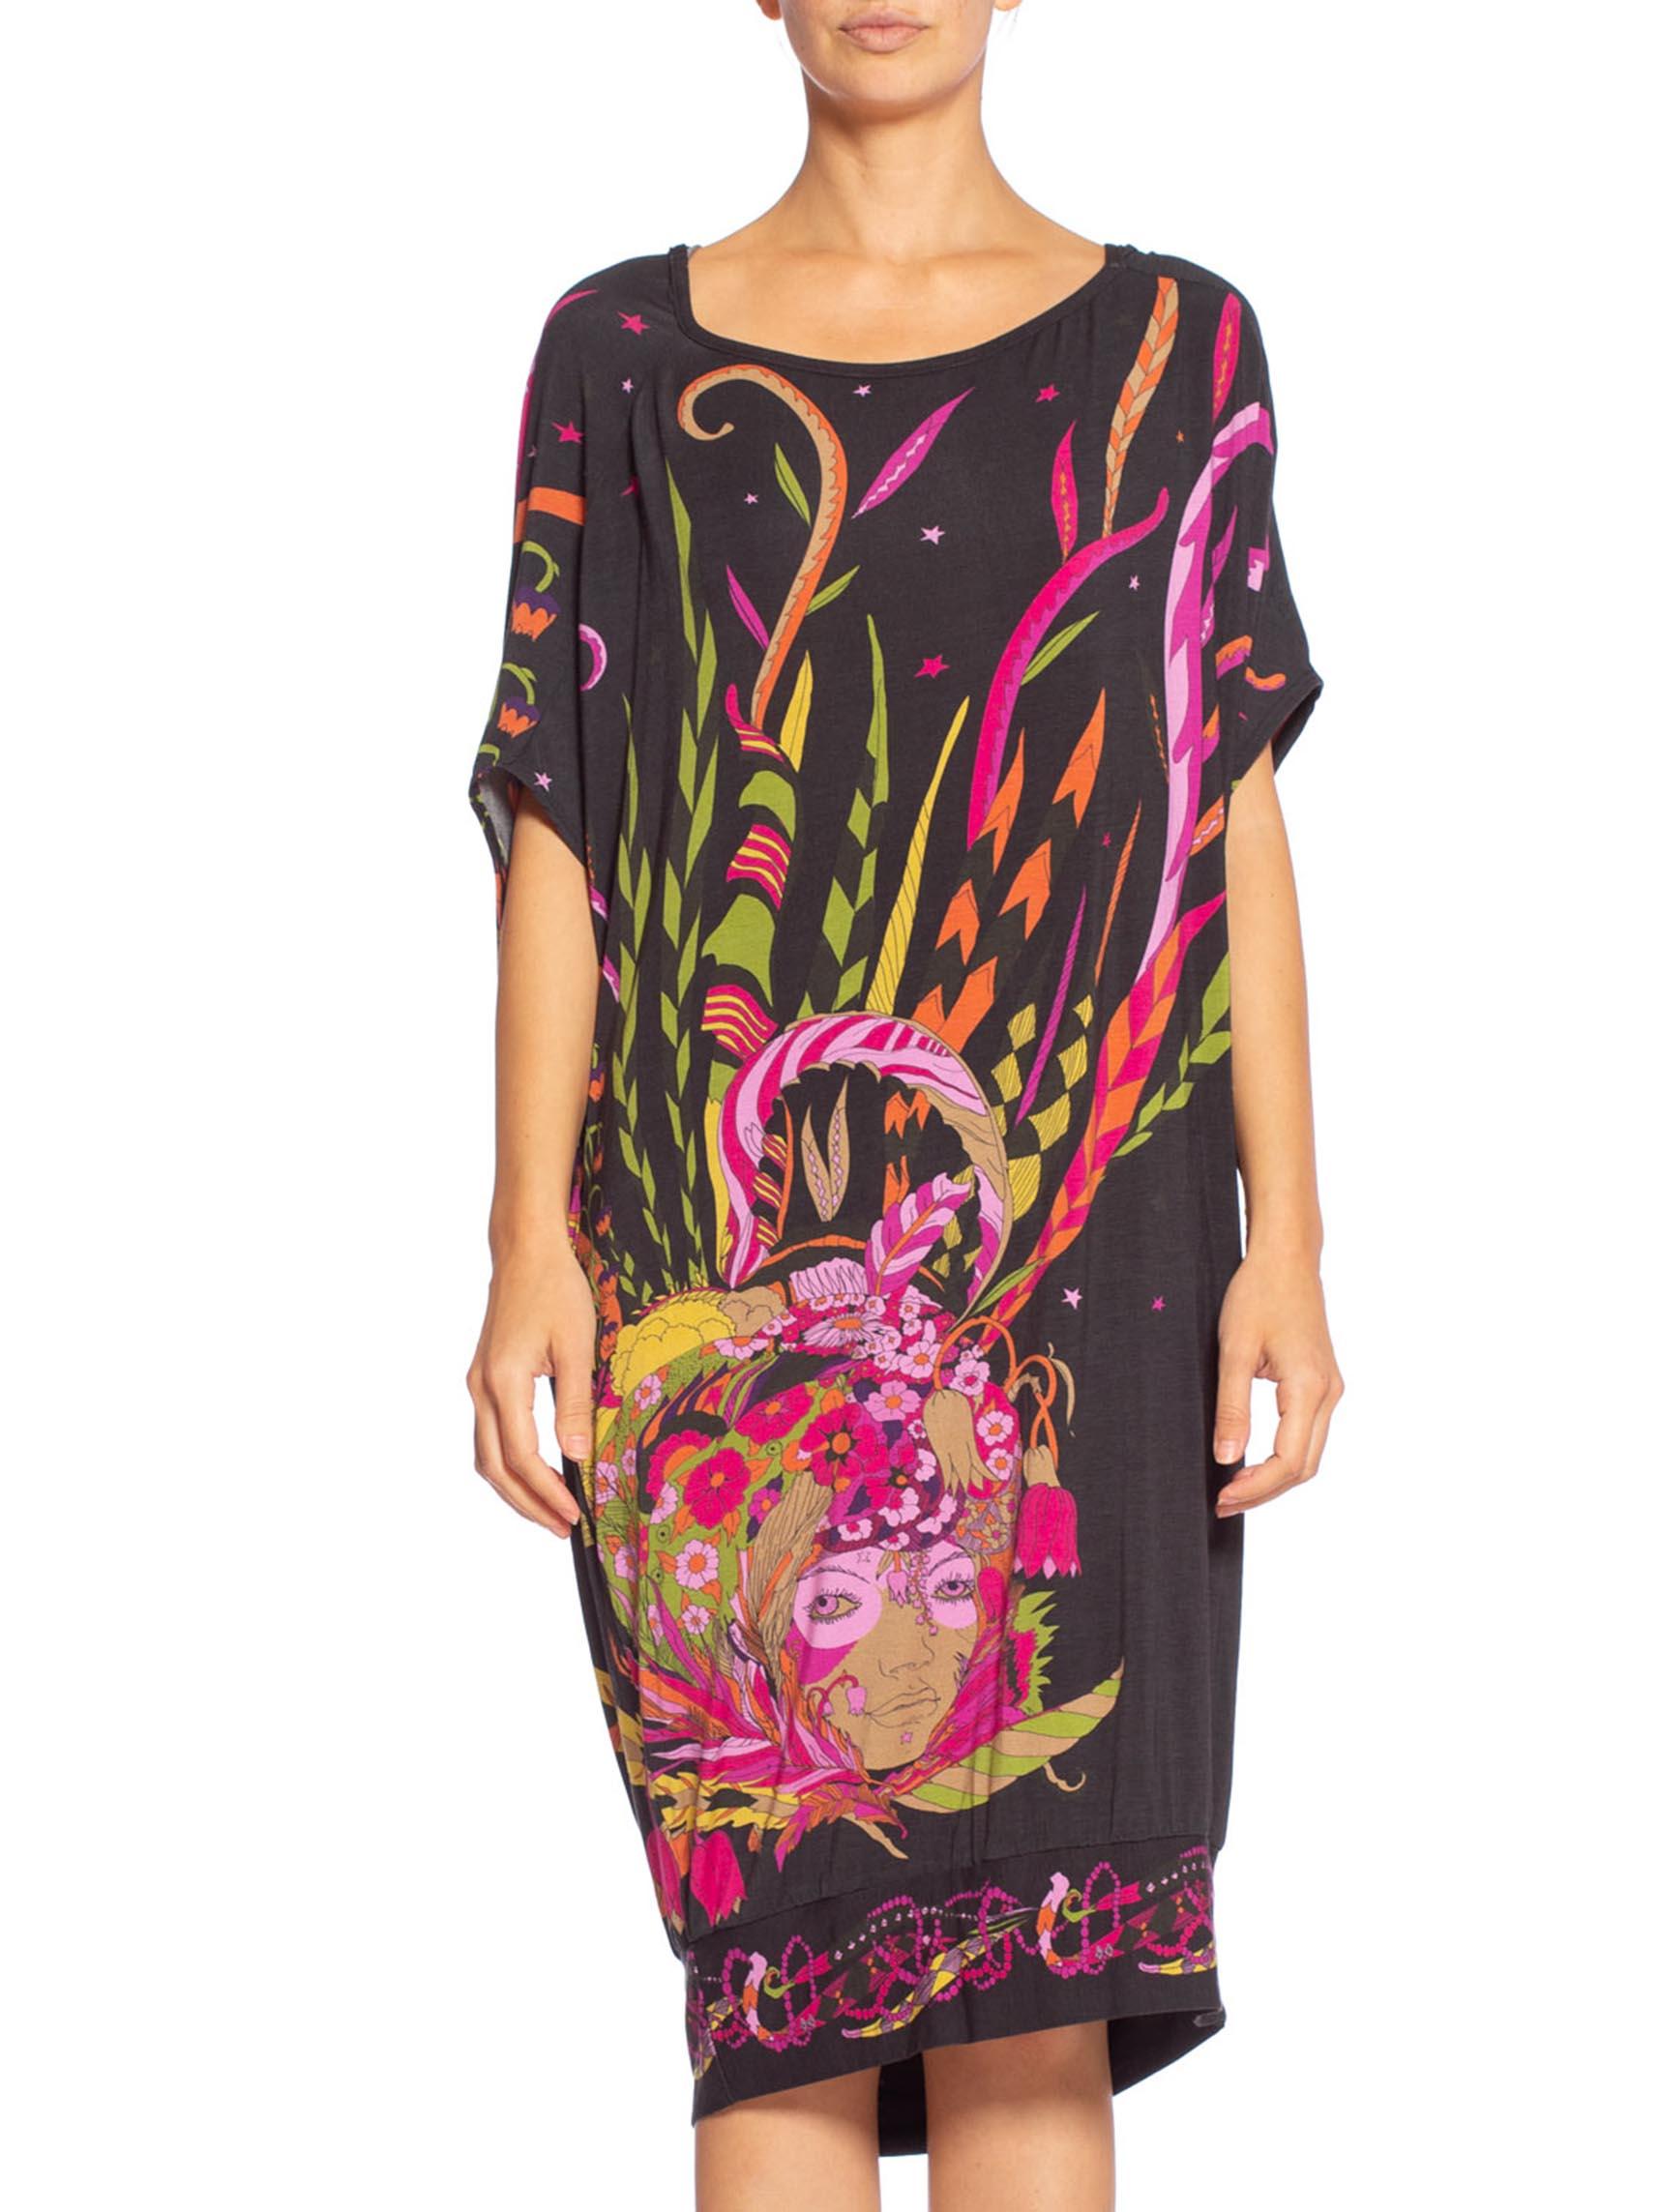 MORPHEW COLLECTION Black Rayon Blend Jersey 1970'S Psychedelic Fortune Teller Print Dress